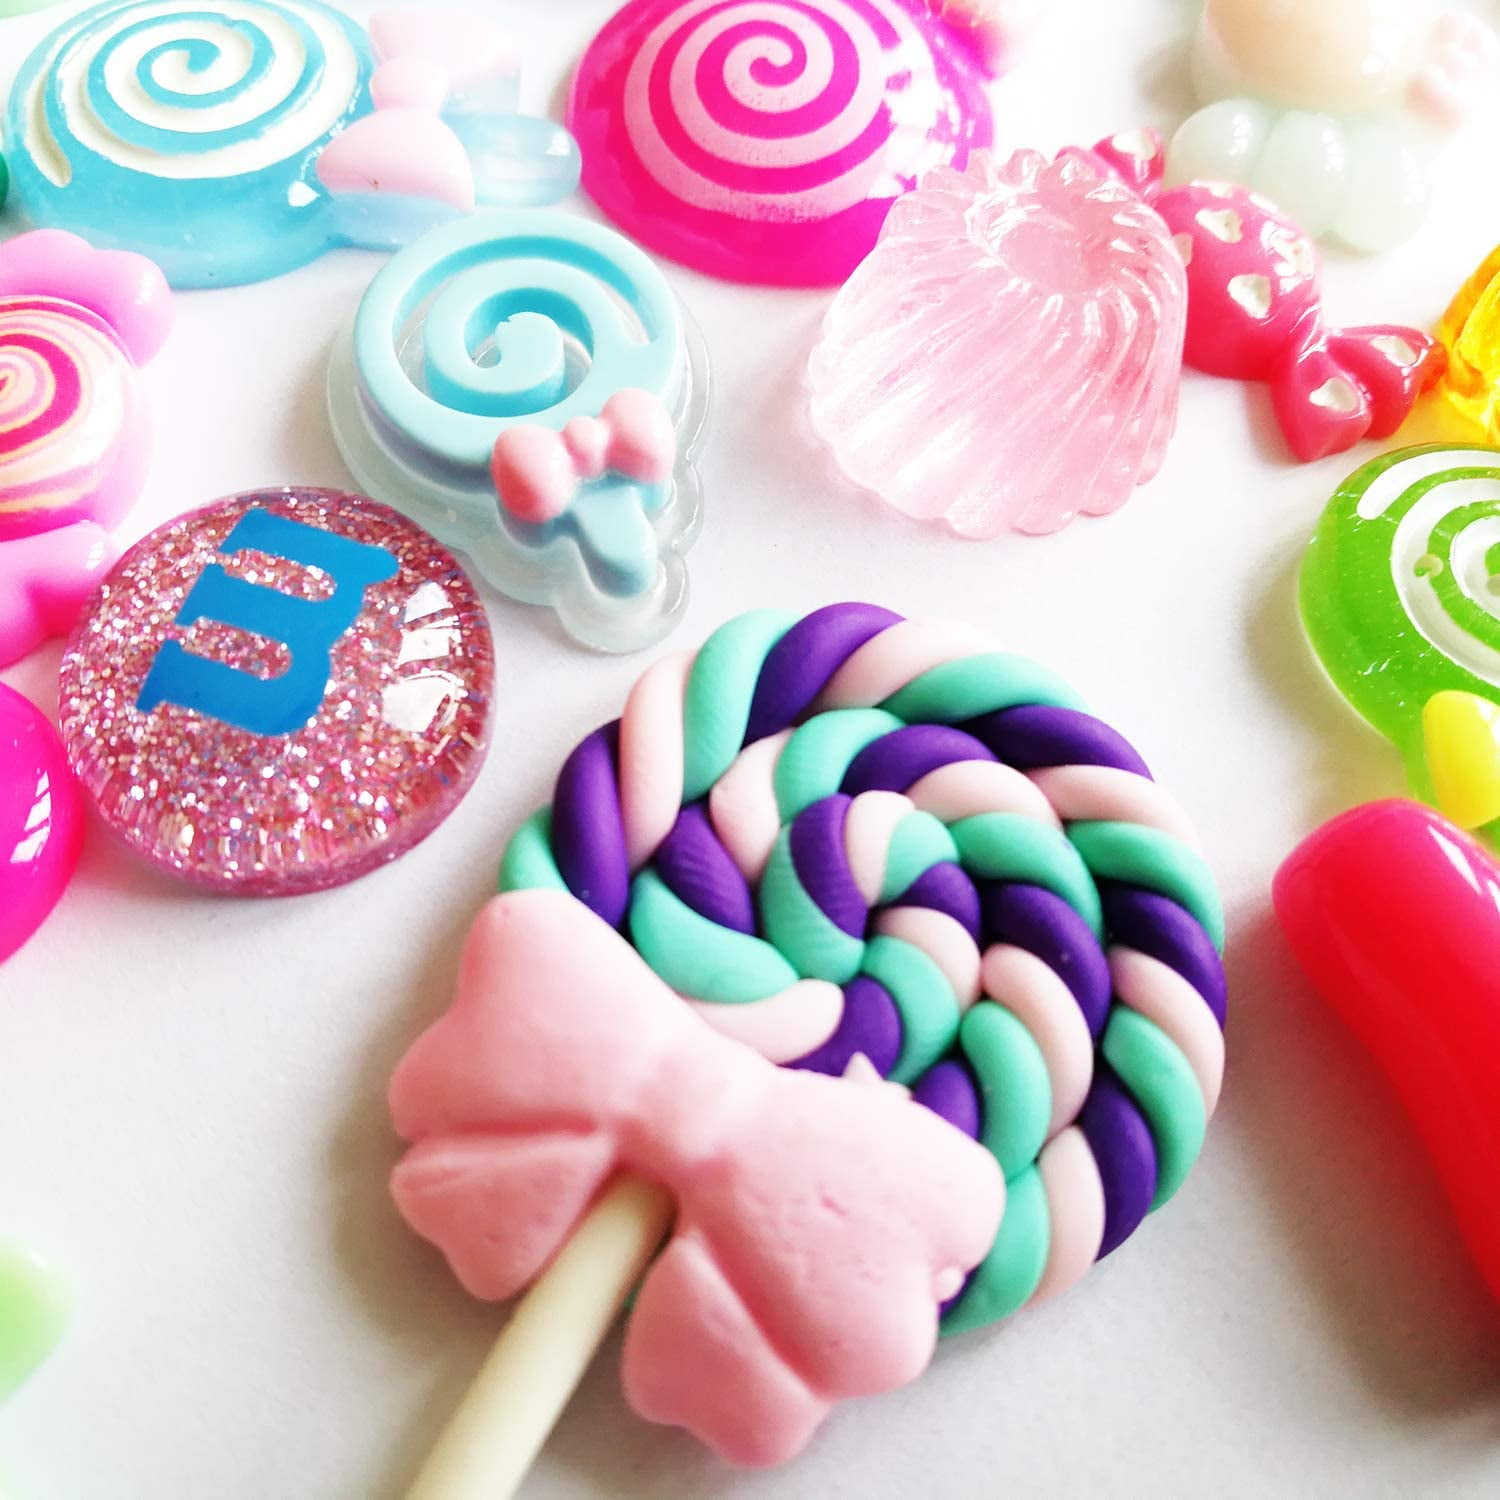 20/40/60 PCS Slime Charms Mixed Cute Snacks Food & Cake Resin Flatback  Cabochon Crafts for DIY Handmade Craft Making Scrapbooking